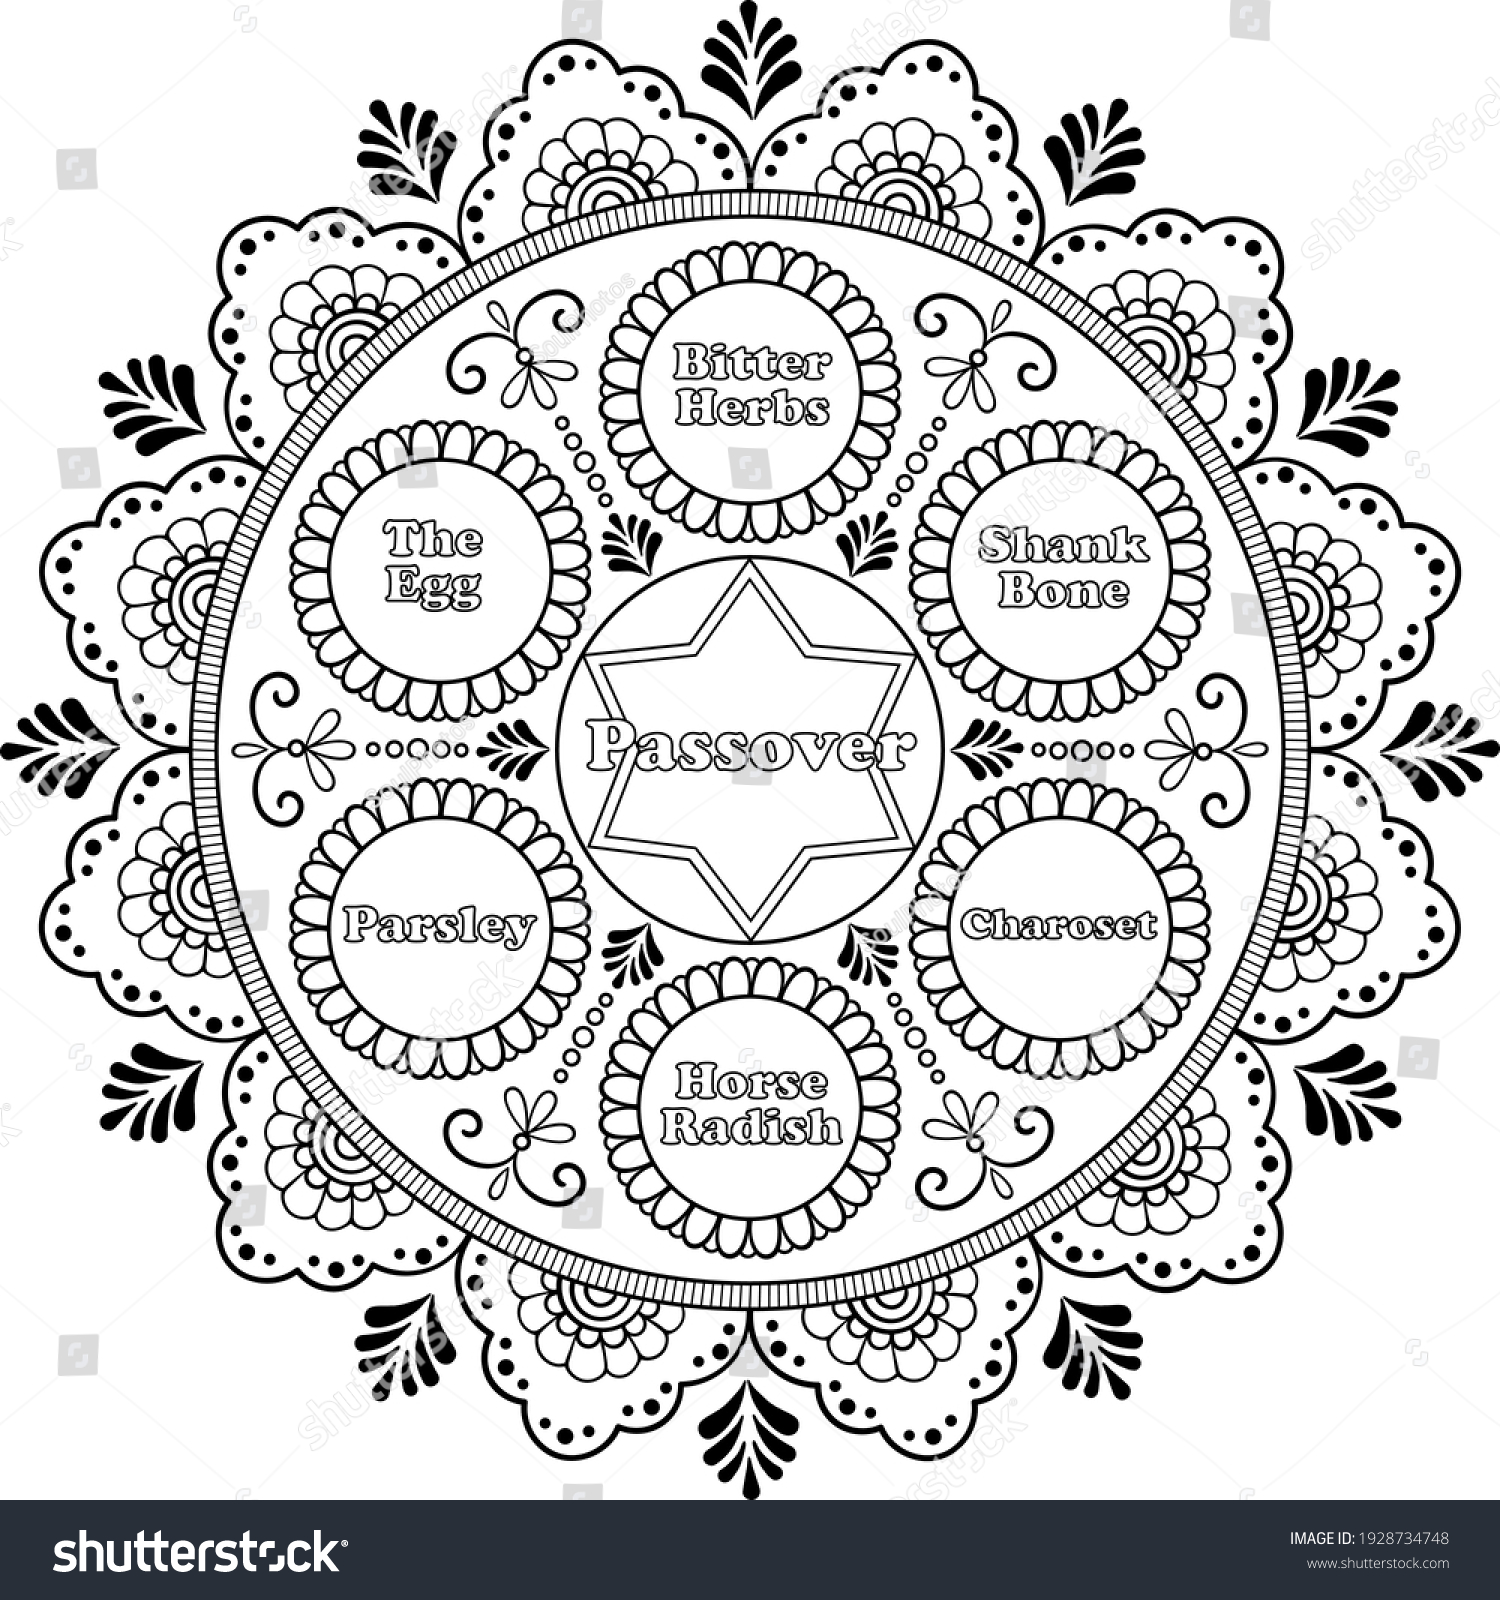 Jewish passover holiday seder plate meal stock vector royalty free